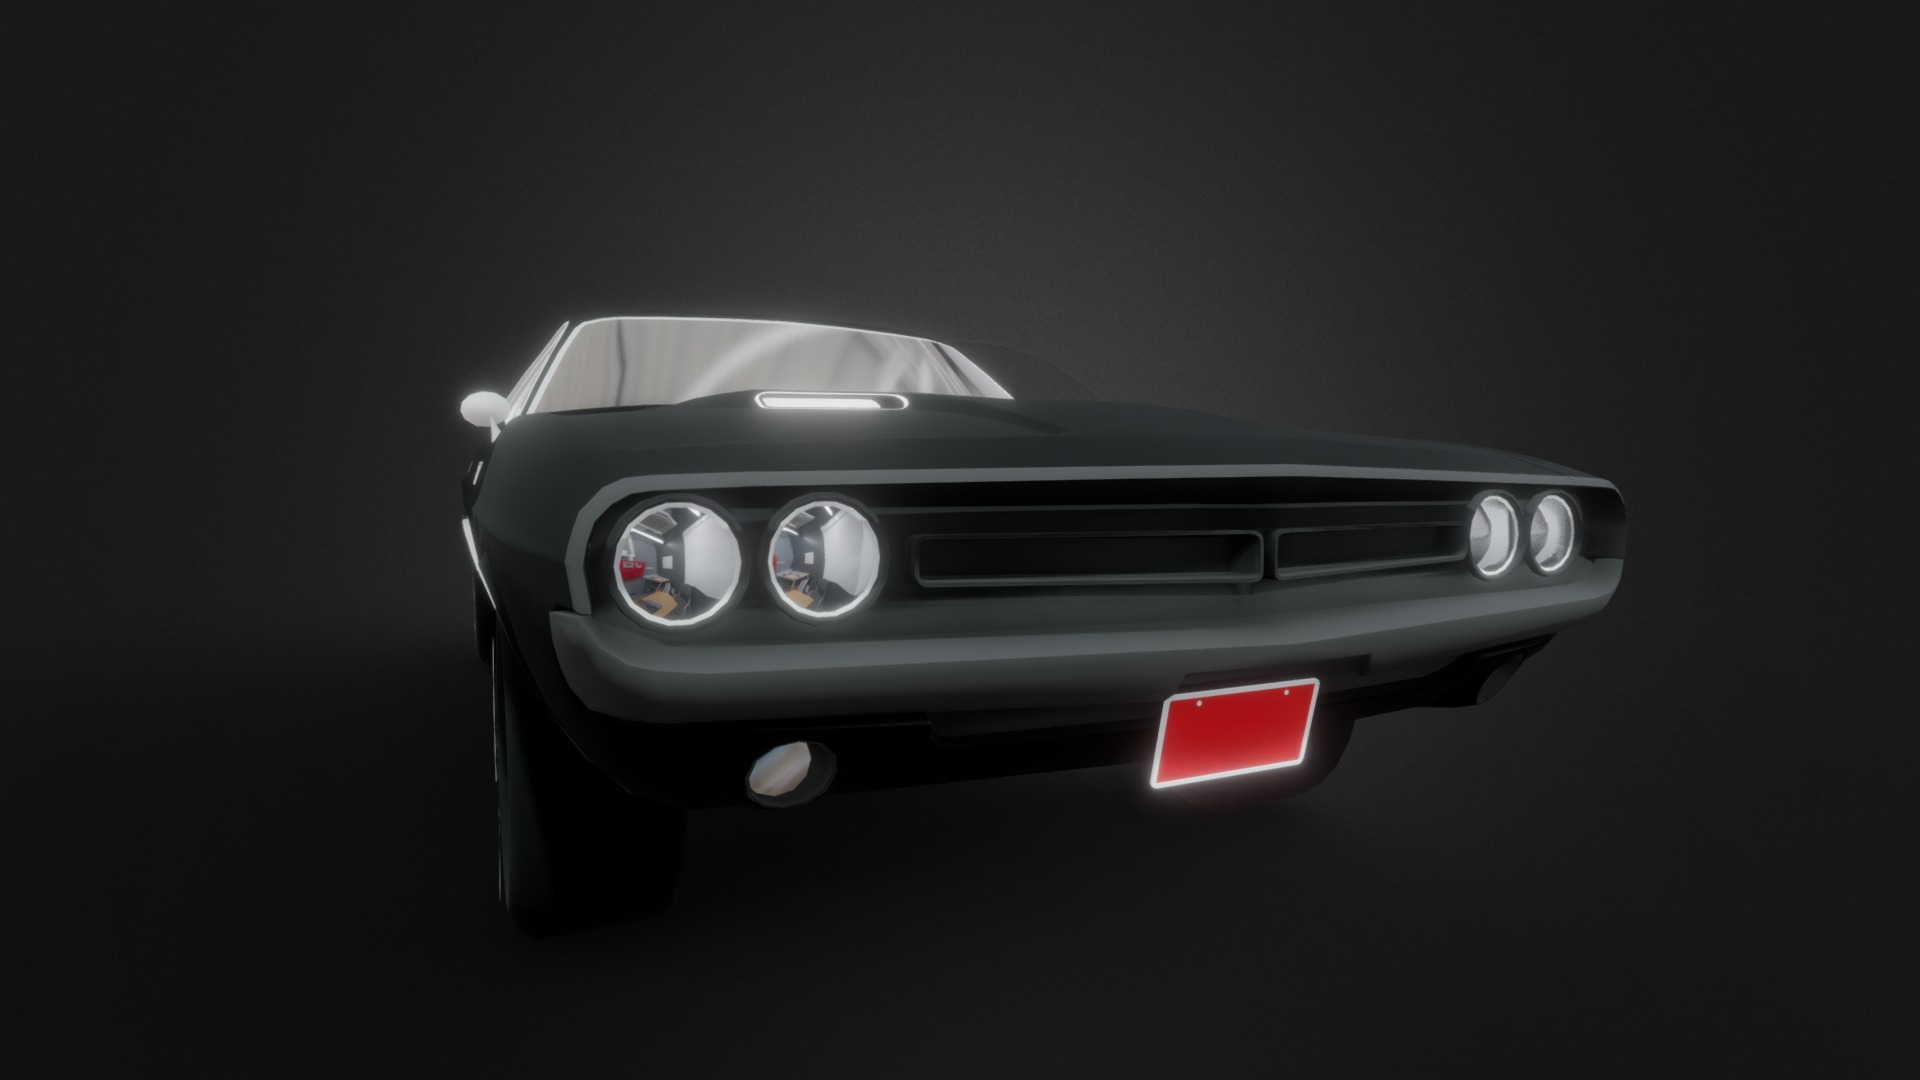 3D model Dodge Challenger Car Modeling - This is a 3D model of the Dodge Challenger Car Modeling. The 3D model is about a black sports car.